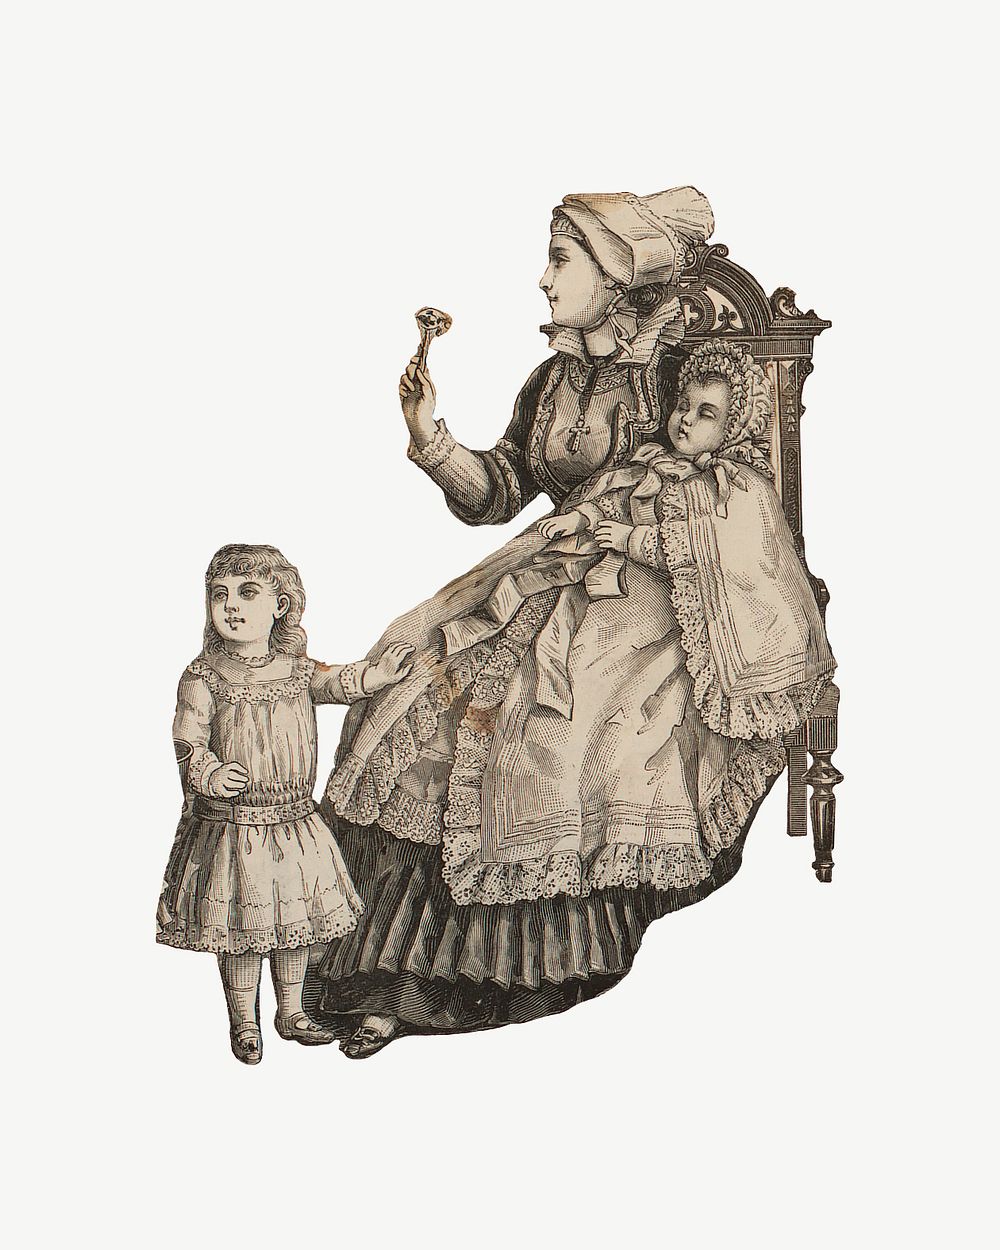 Victorian mother and children, vintage collage element psd. Remastered by rawpixel.